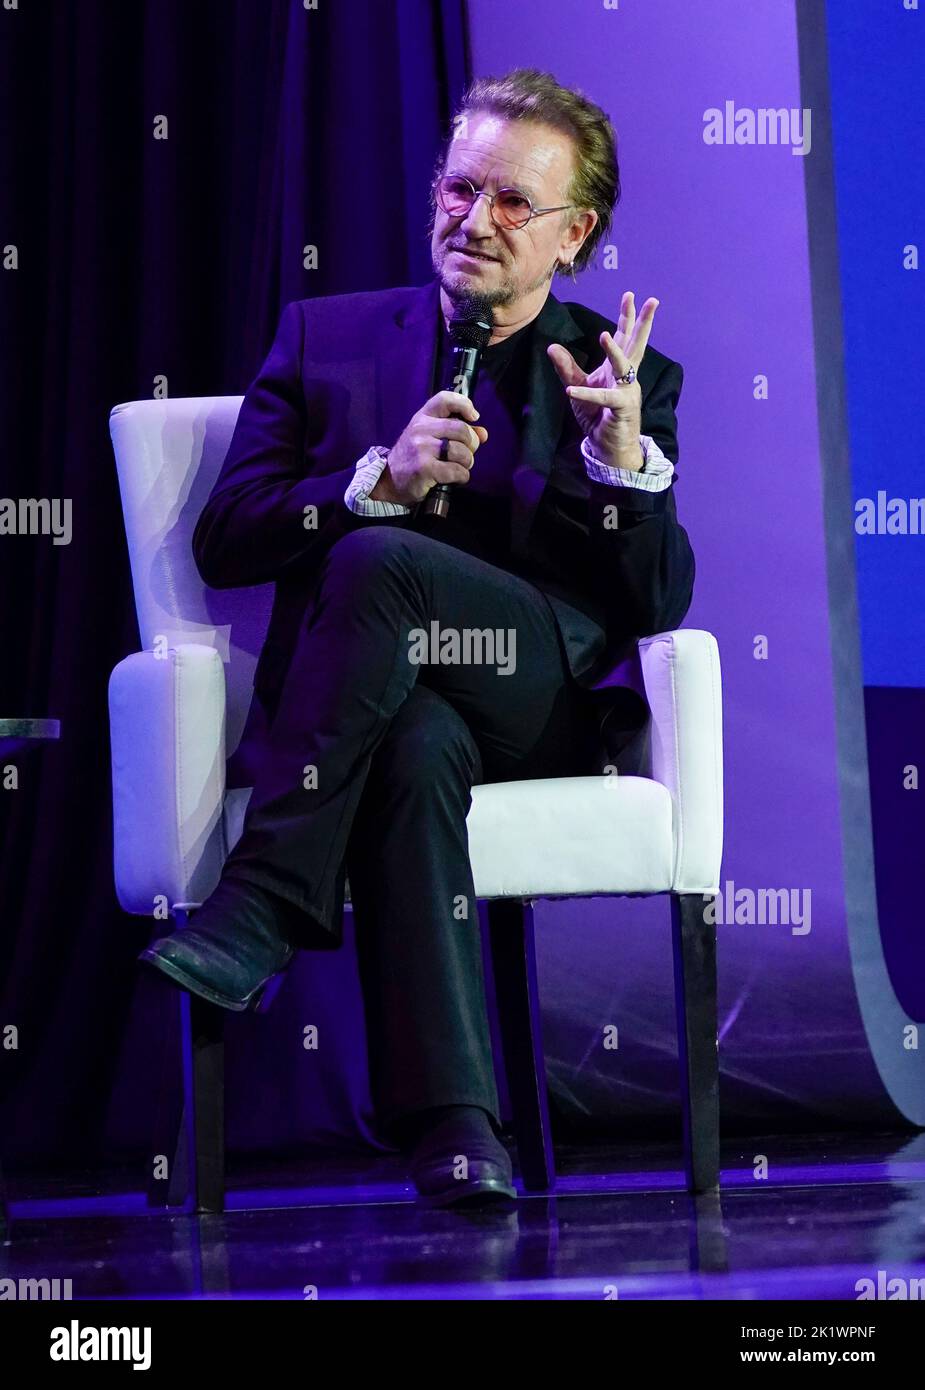 09/20/2022 New York City, New York Bono during the 2022 Clinton Global Initiative held at Hilton Midtown Tuesday September 20, 2022 in New York City. Photo by Jennifer Graylock-Alamy News 917-519-7666 Stock Photo